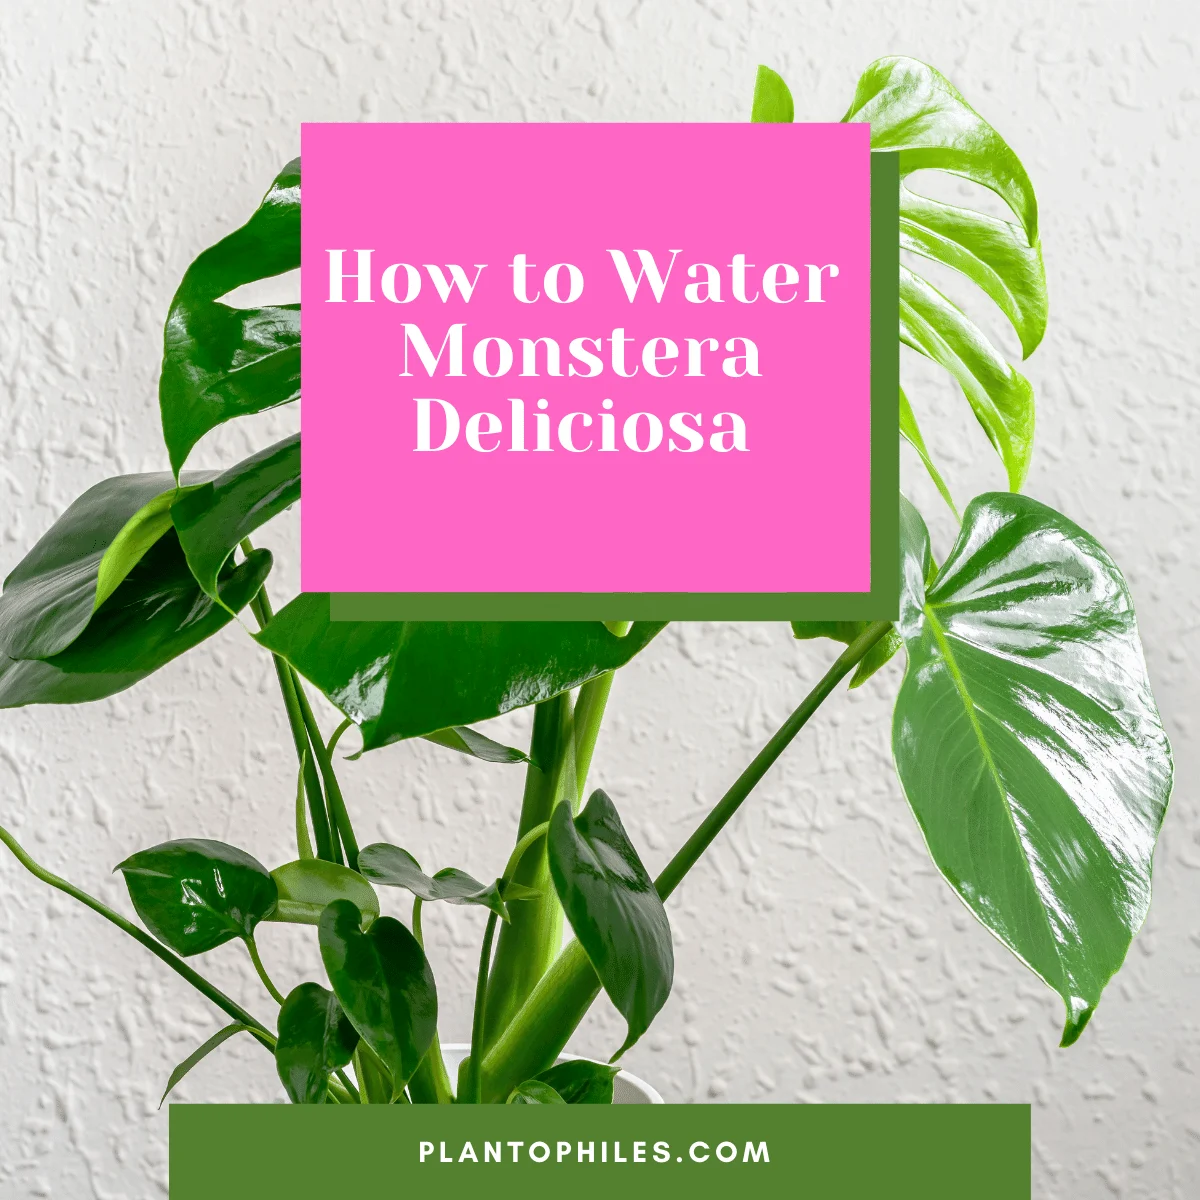 How to Water Monstera deliciosa